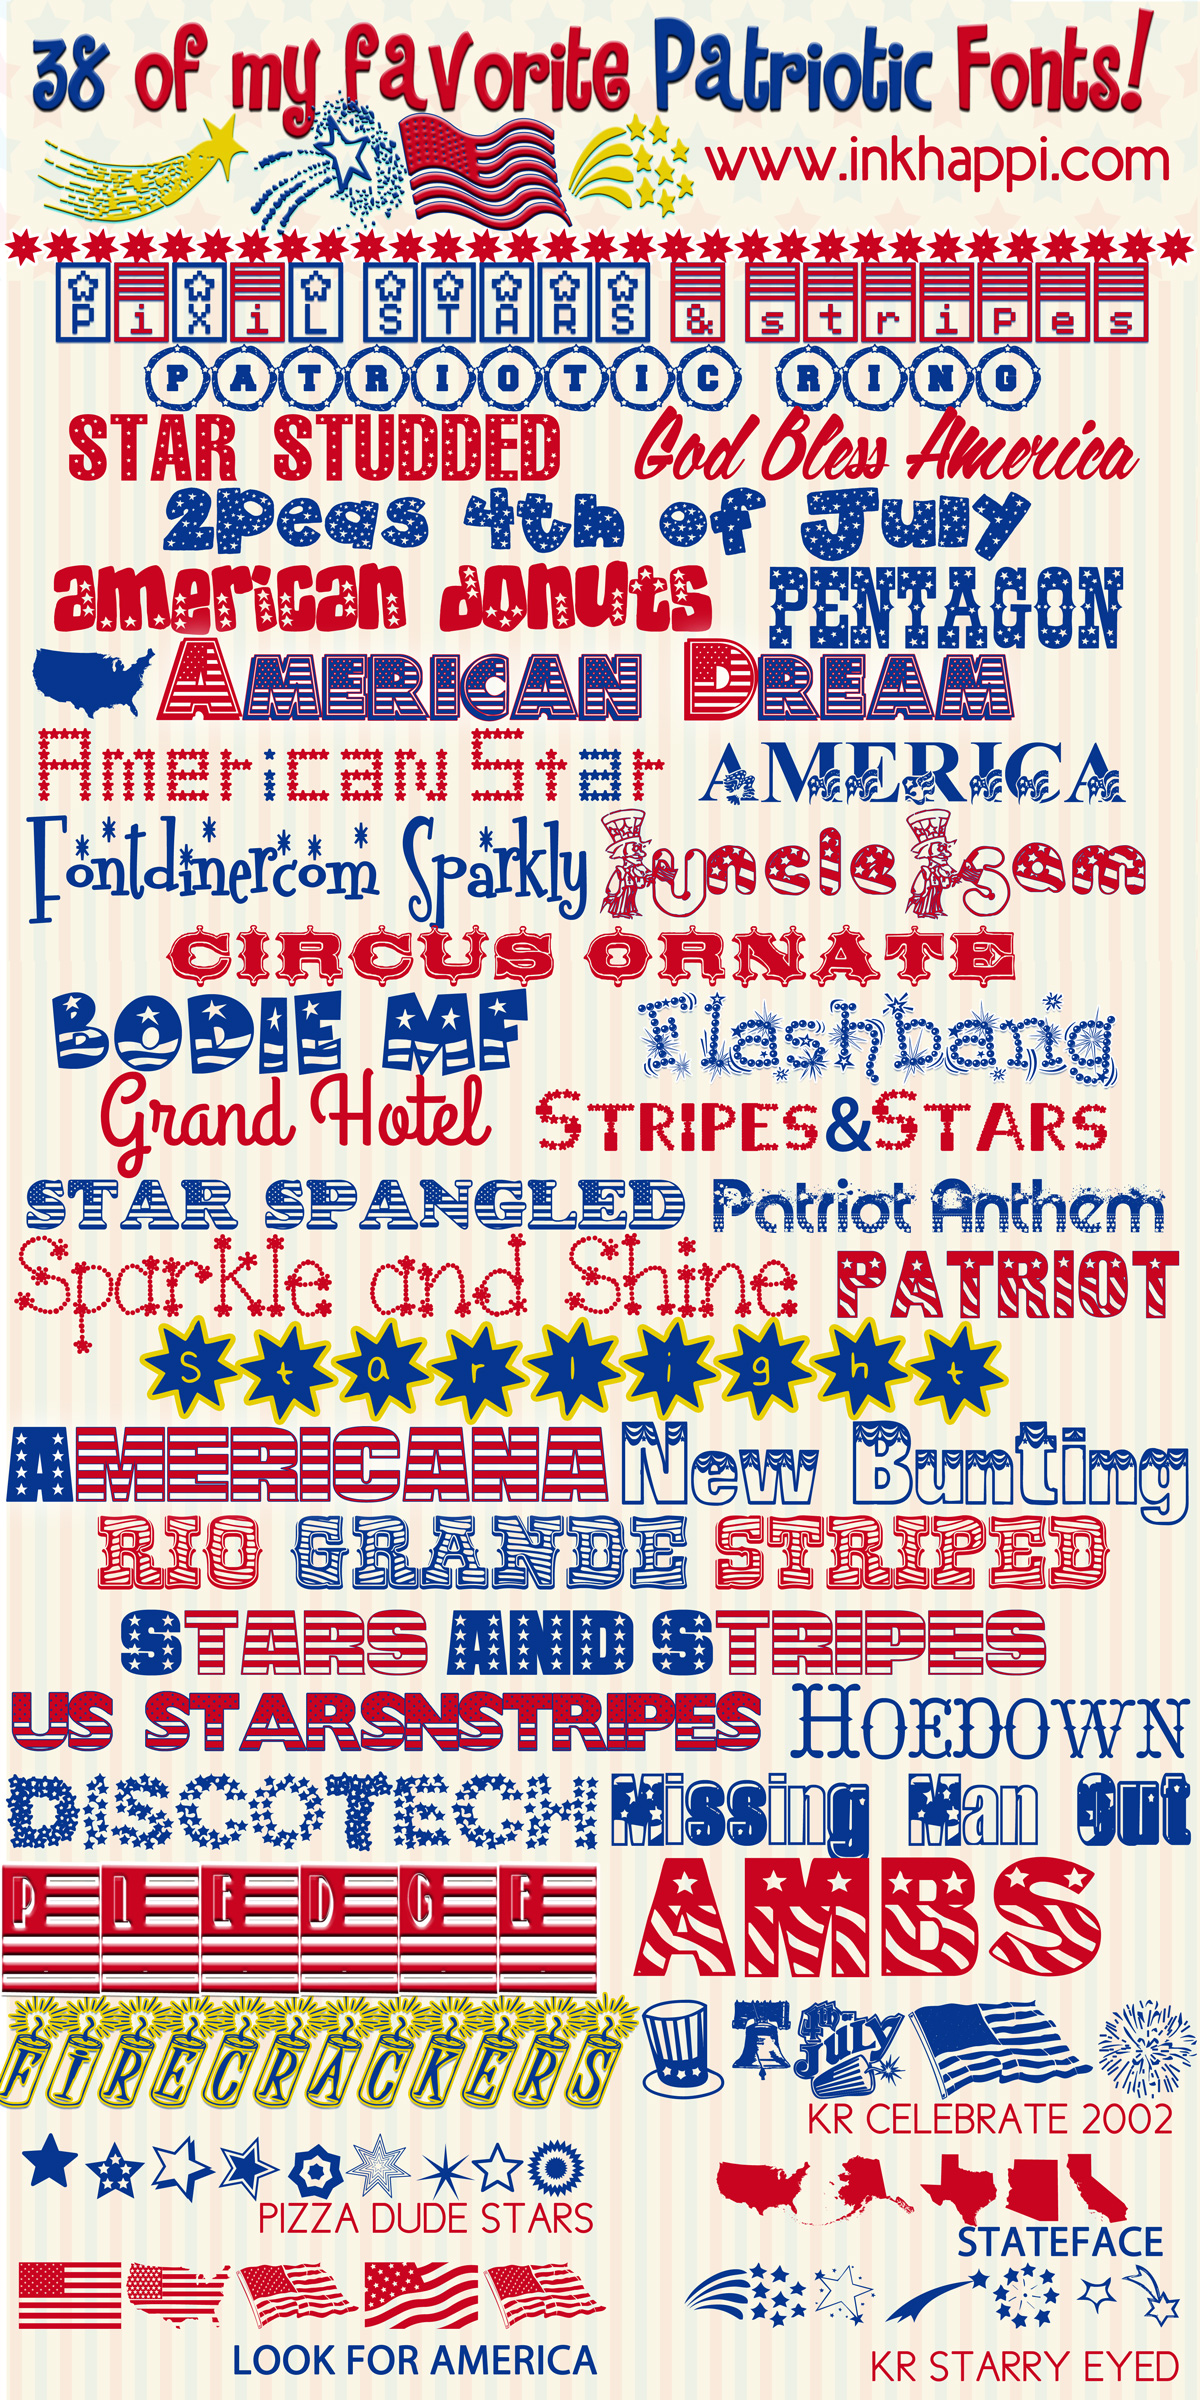 Patriotic Fonts! Here's 38 of the best free Patriotic Fonts - inkhappi